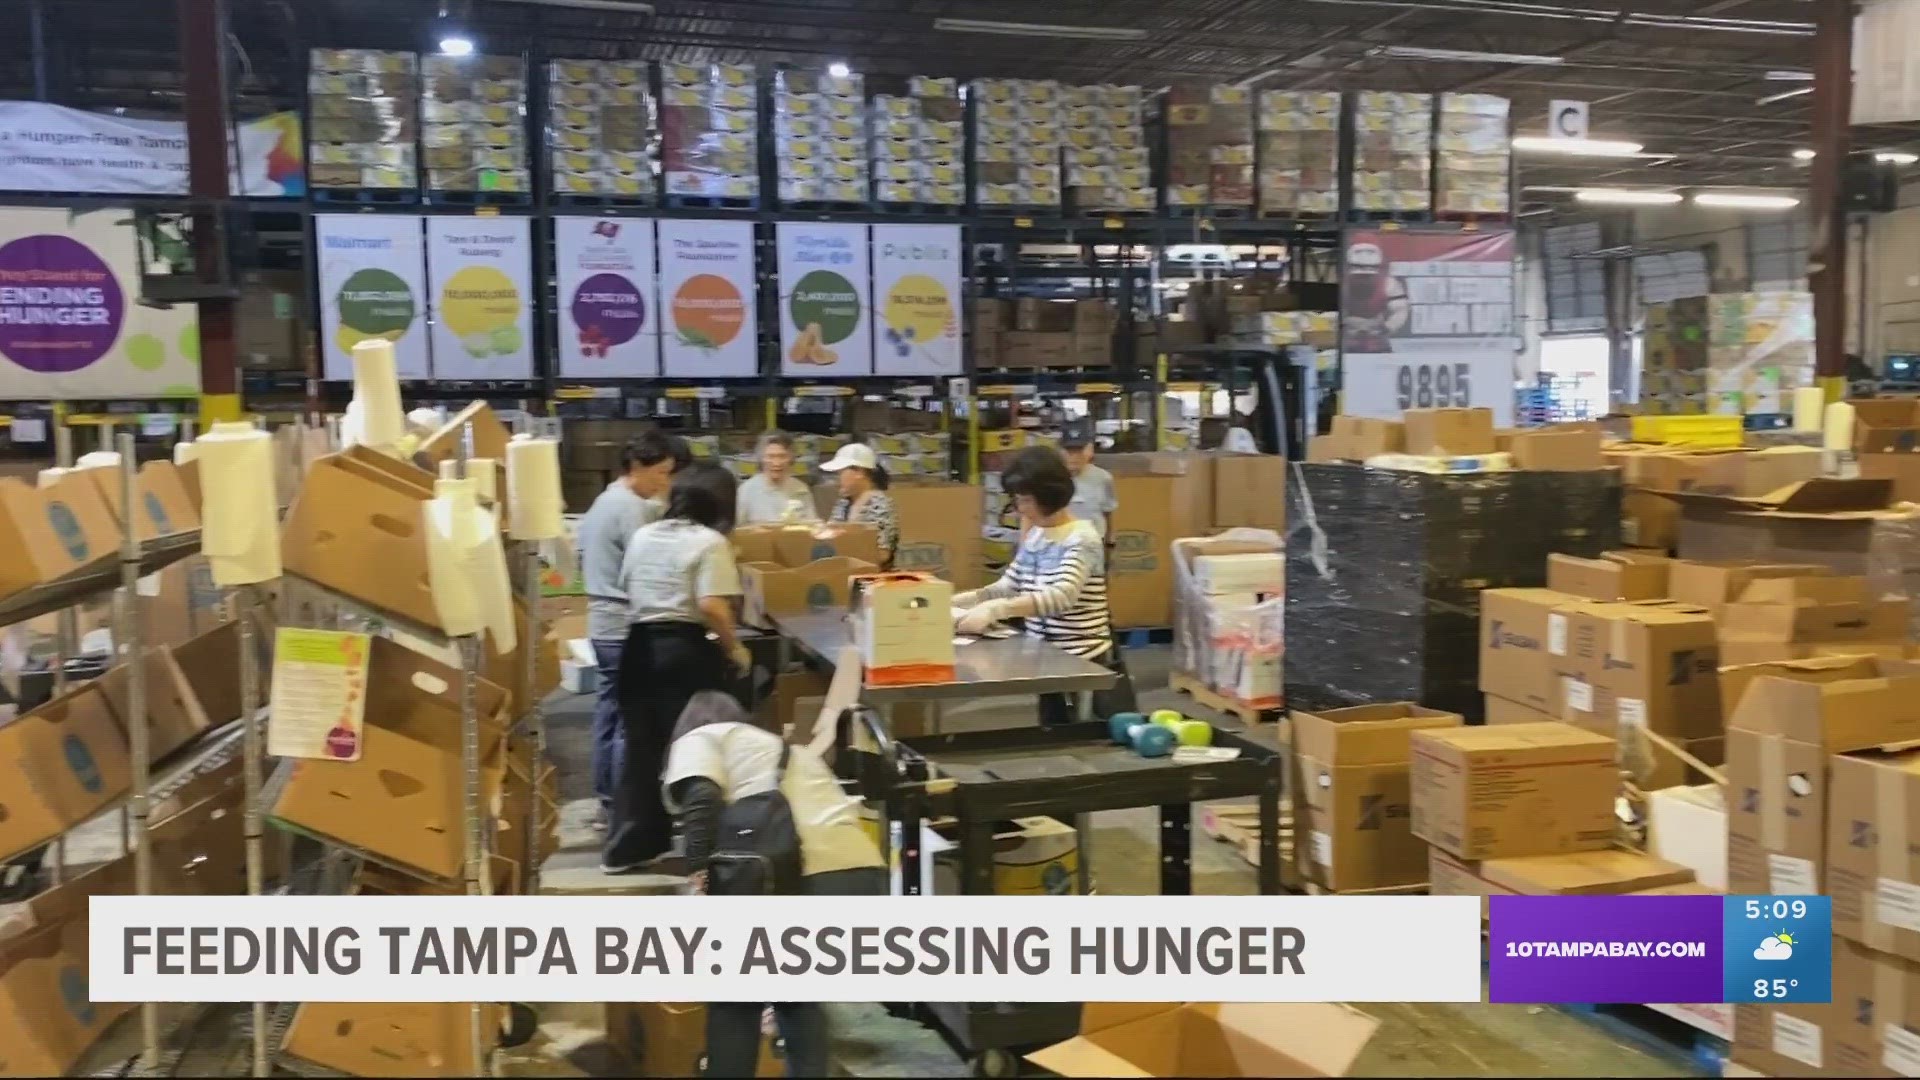 You can't tackle hunger without knowing how big a problem it is. Feeding Tampa Bay partners with USF to measure the needs surrounding food insecurity.